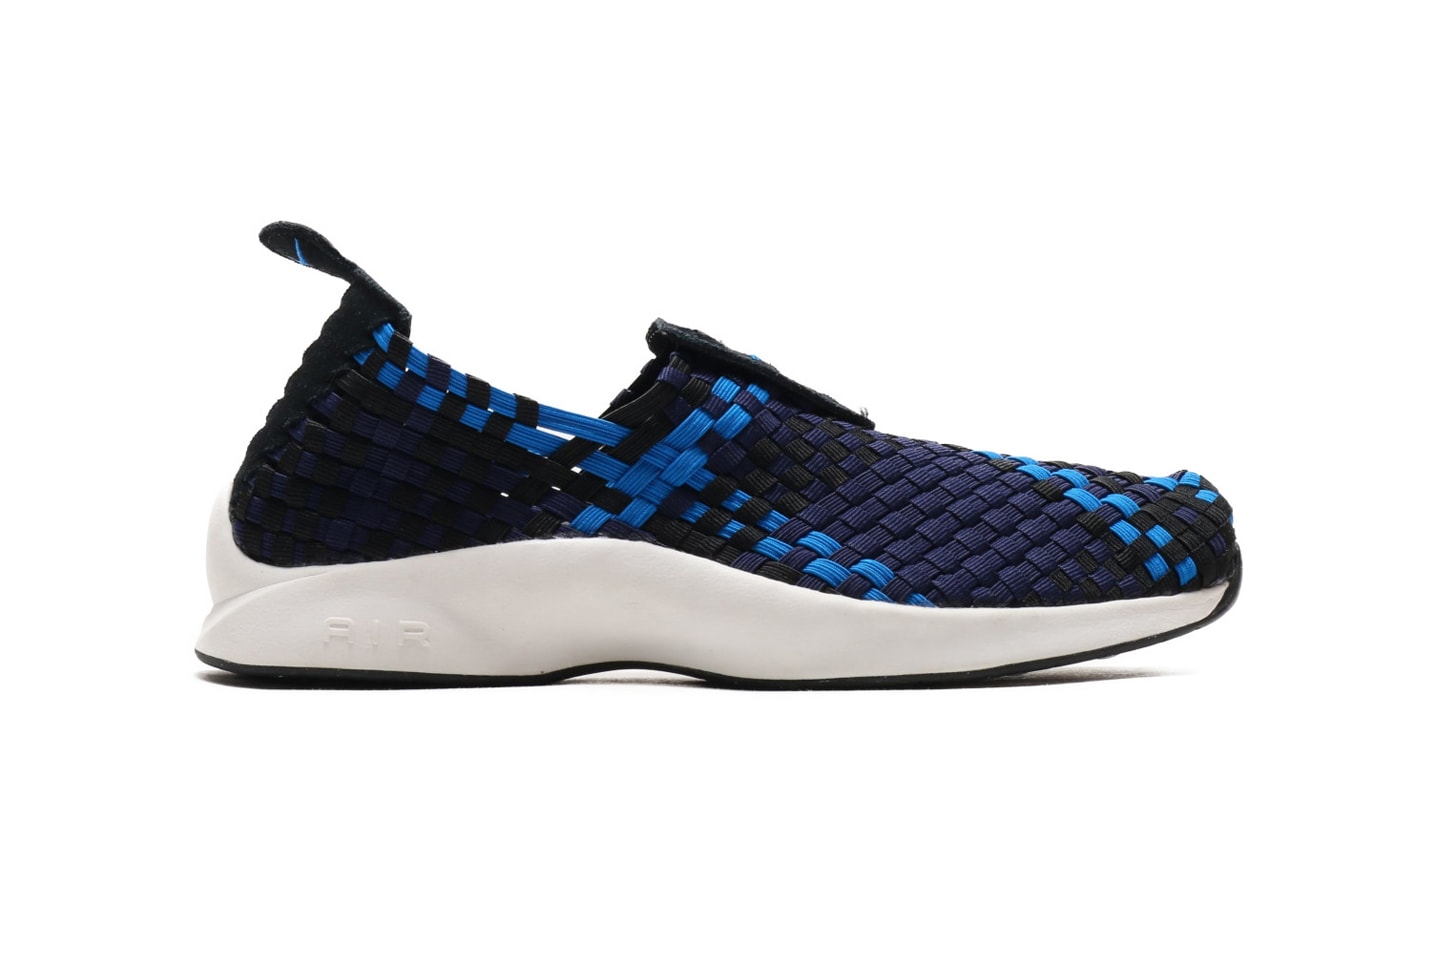 Nike Air Woven Spring Summer 2018 Drops may release date info drop sneakers shoes footwear